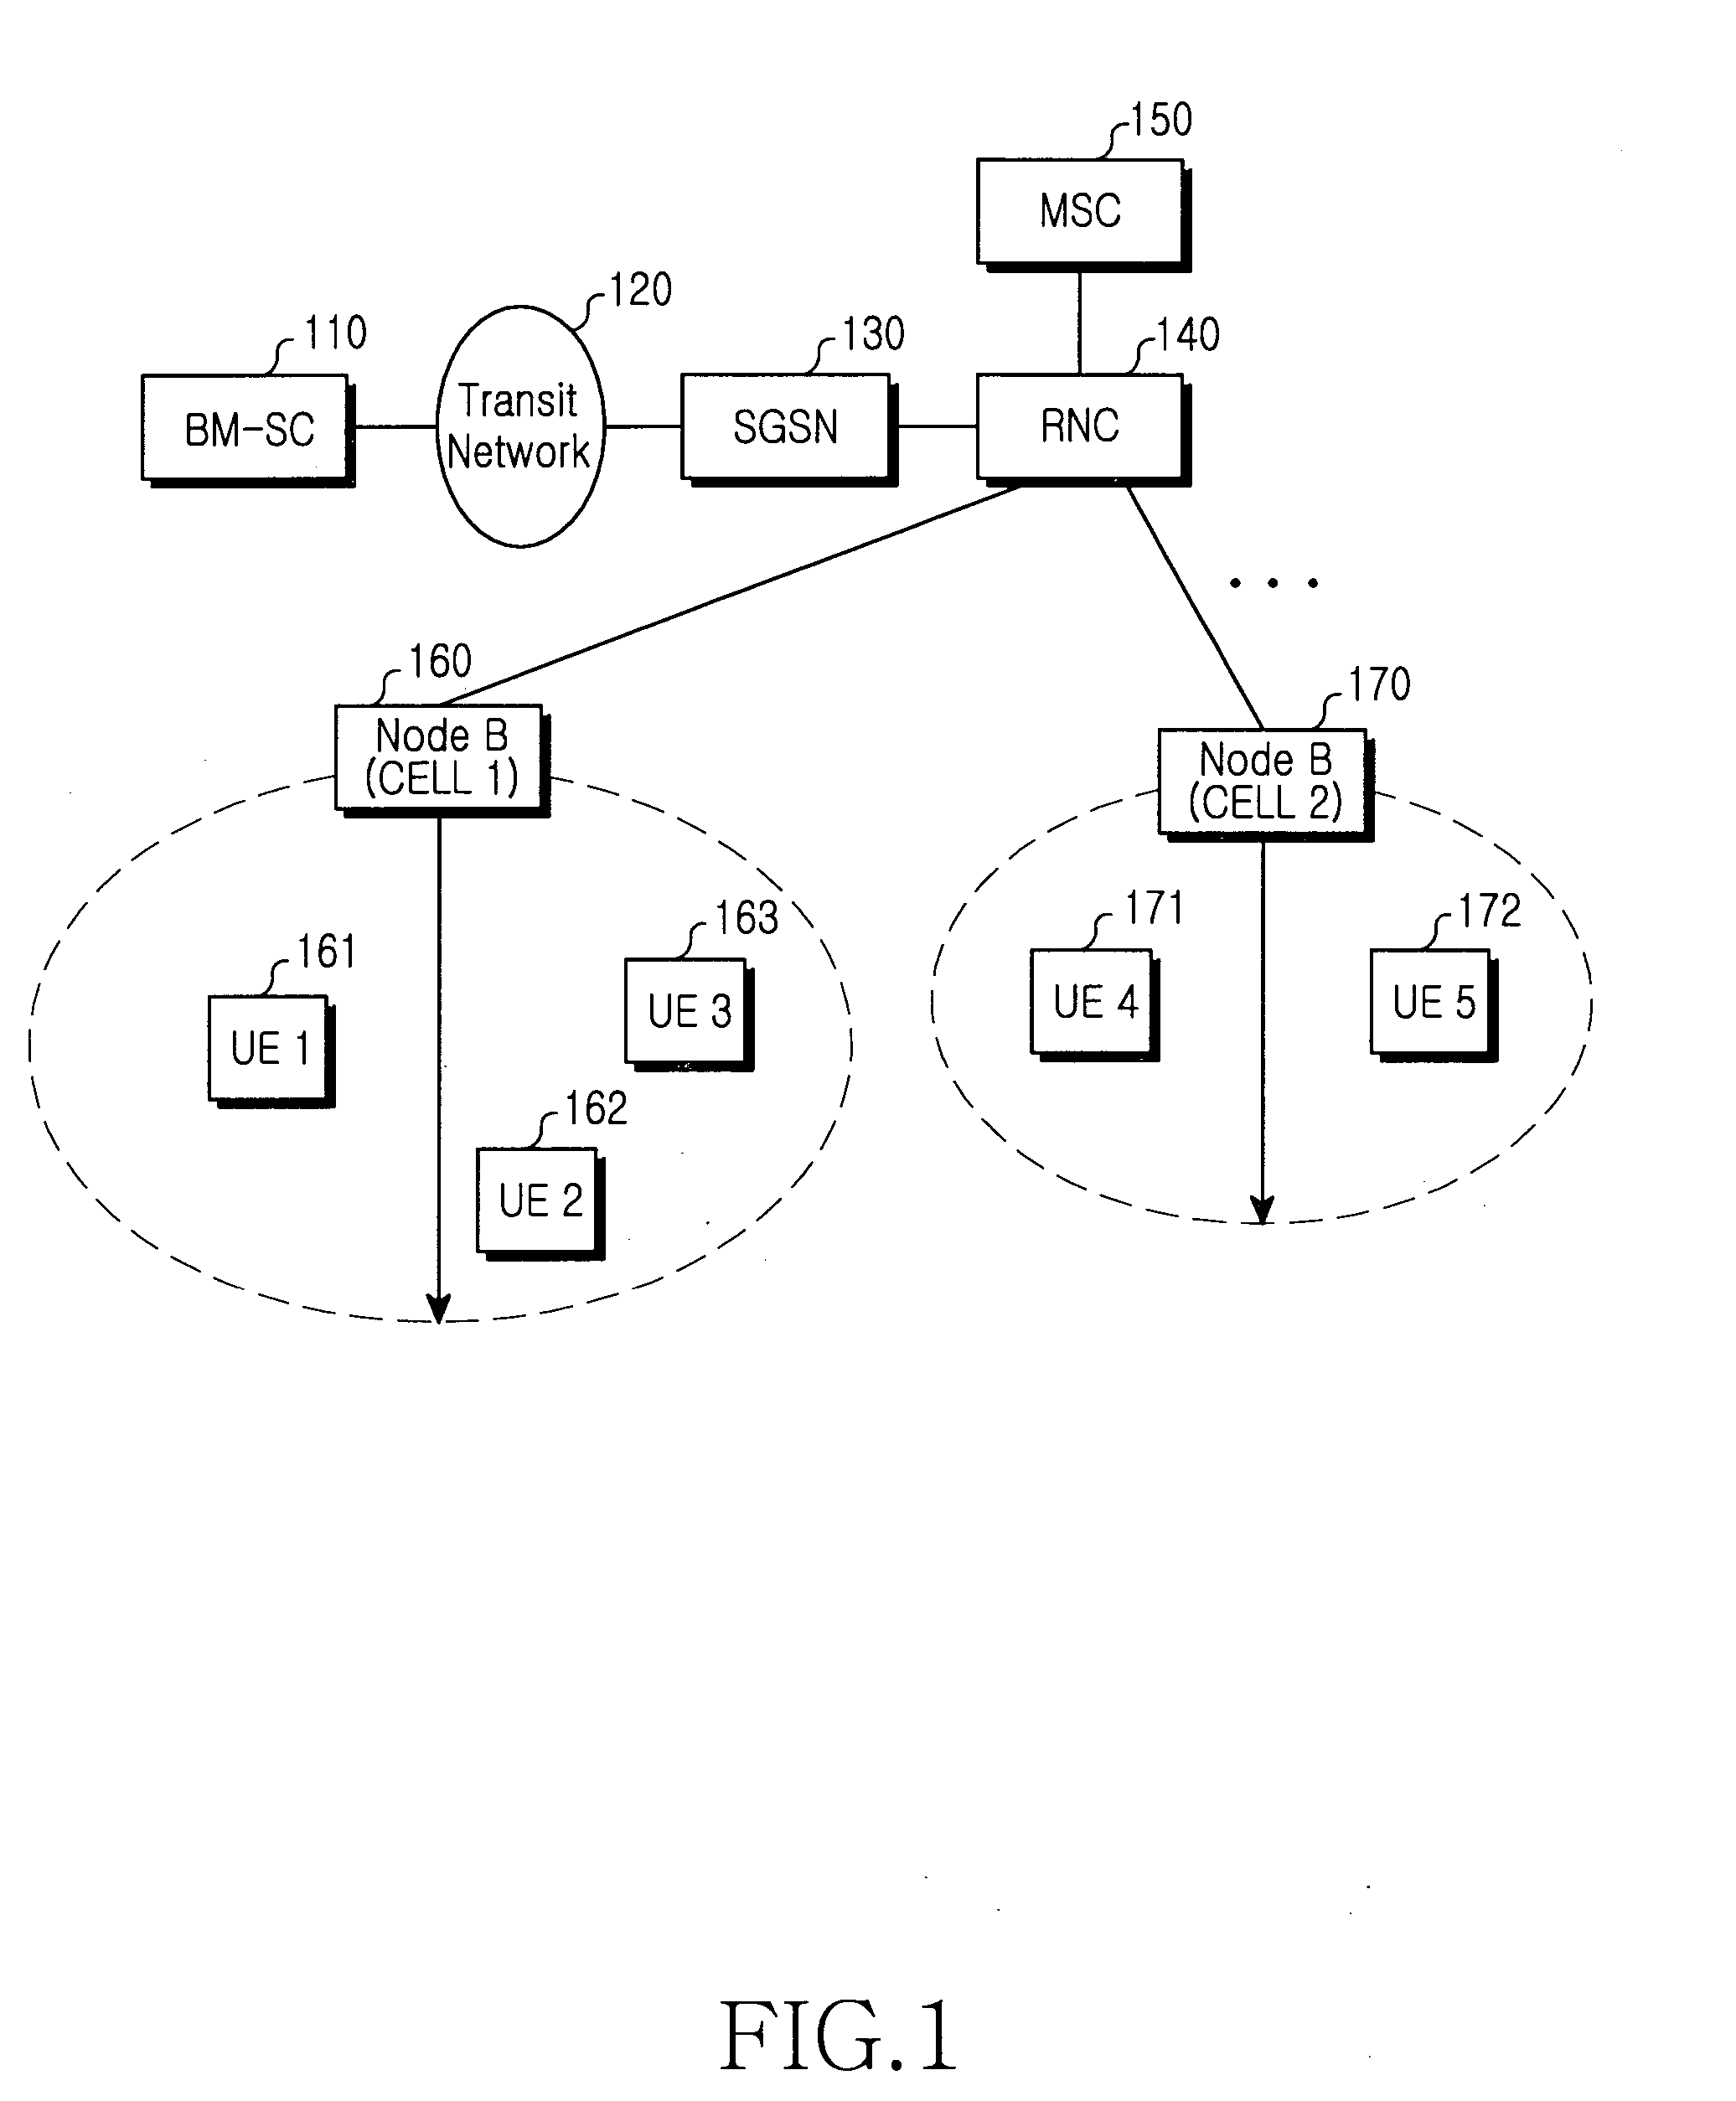 Method and apparatus for indicating cell selection when a session is stopped in a multimedia broadcast/multicast service system